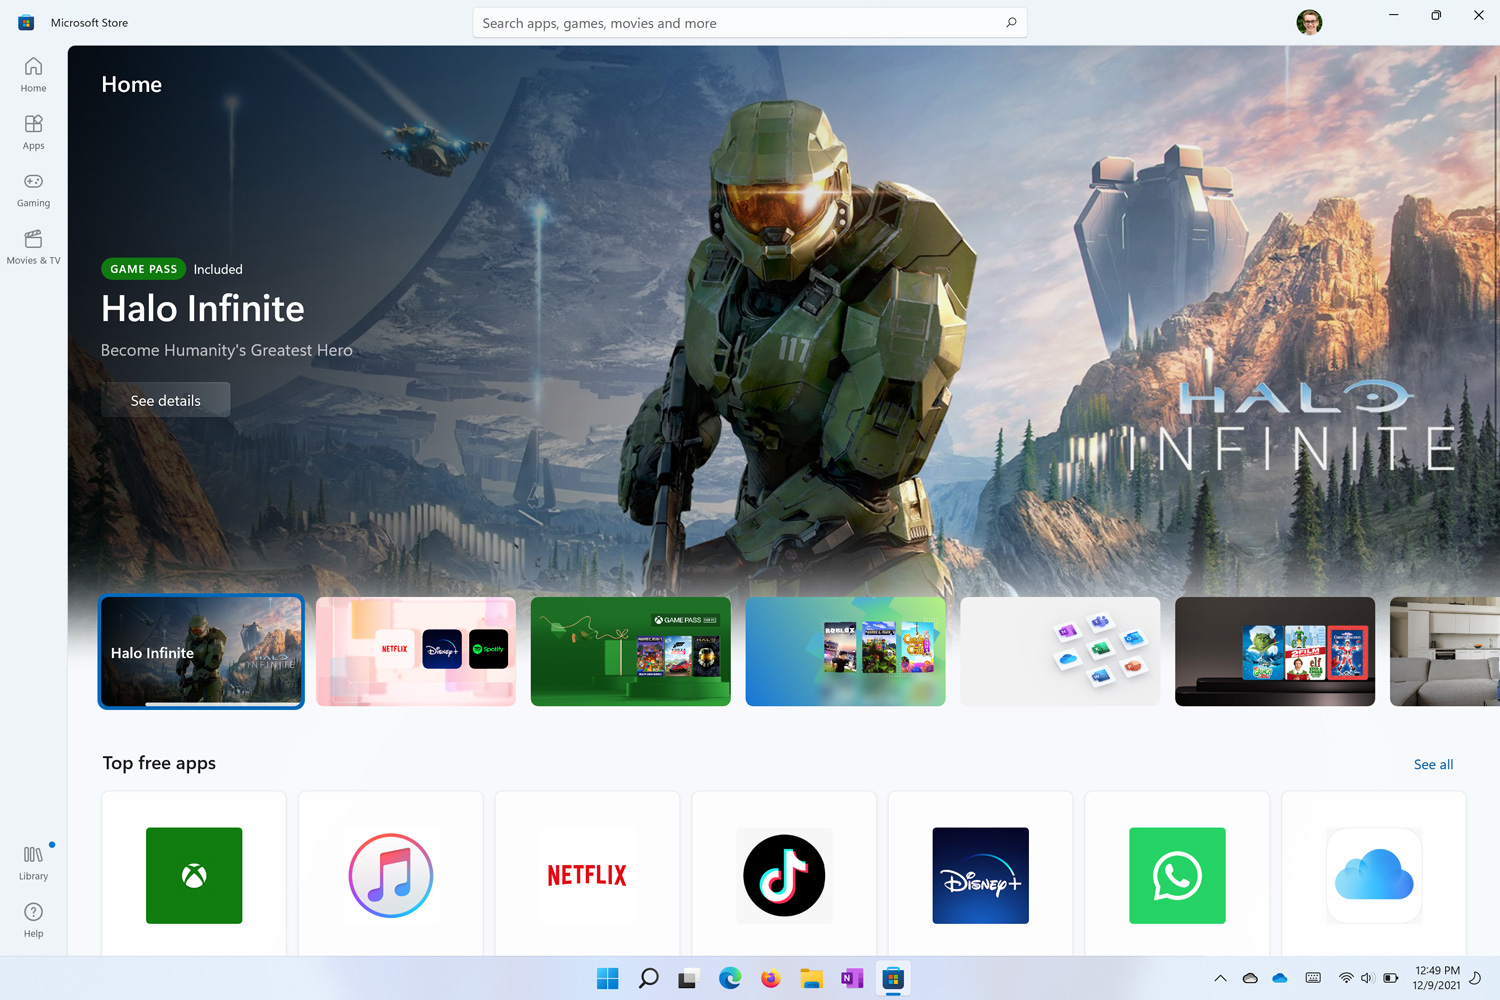 How to Download & Install Apps from Microsoft Store in Windows 10 - Install  From Windows Store 